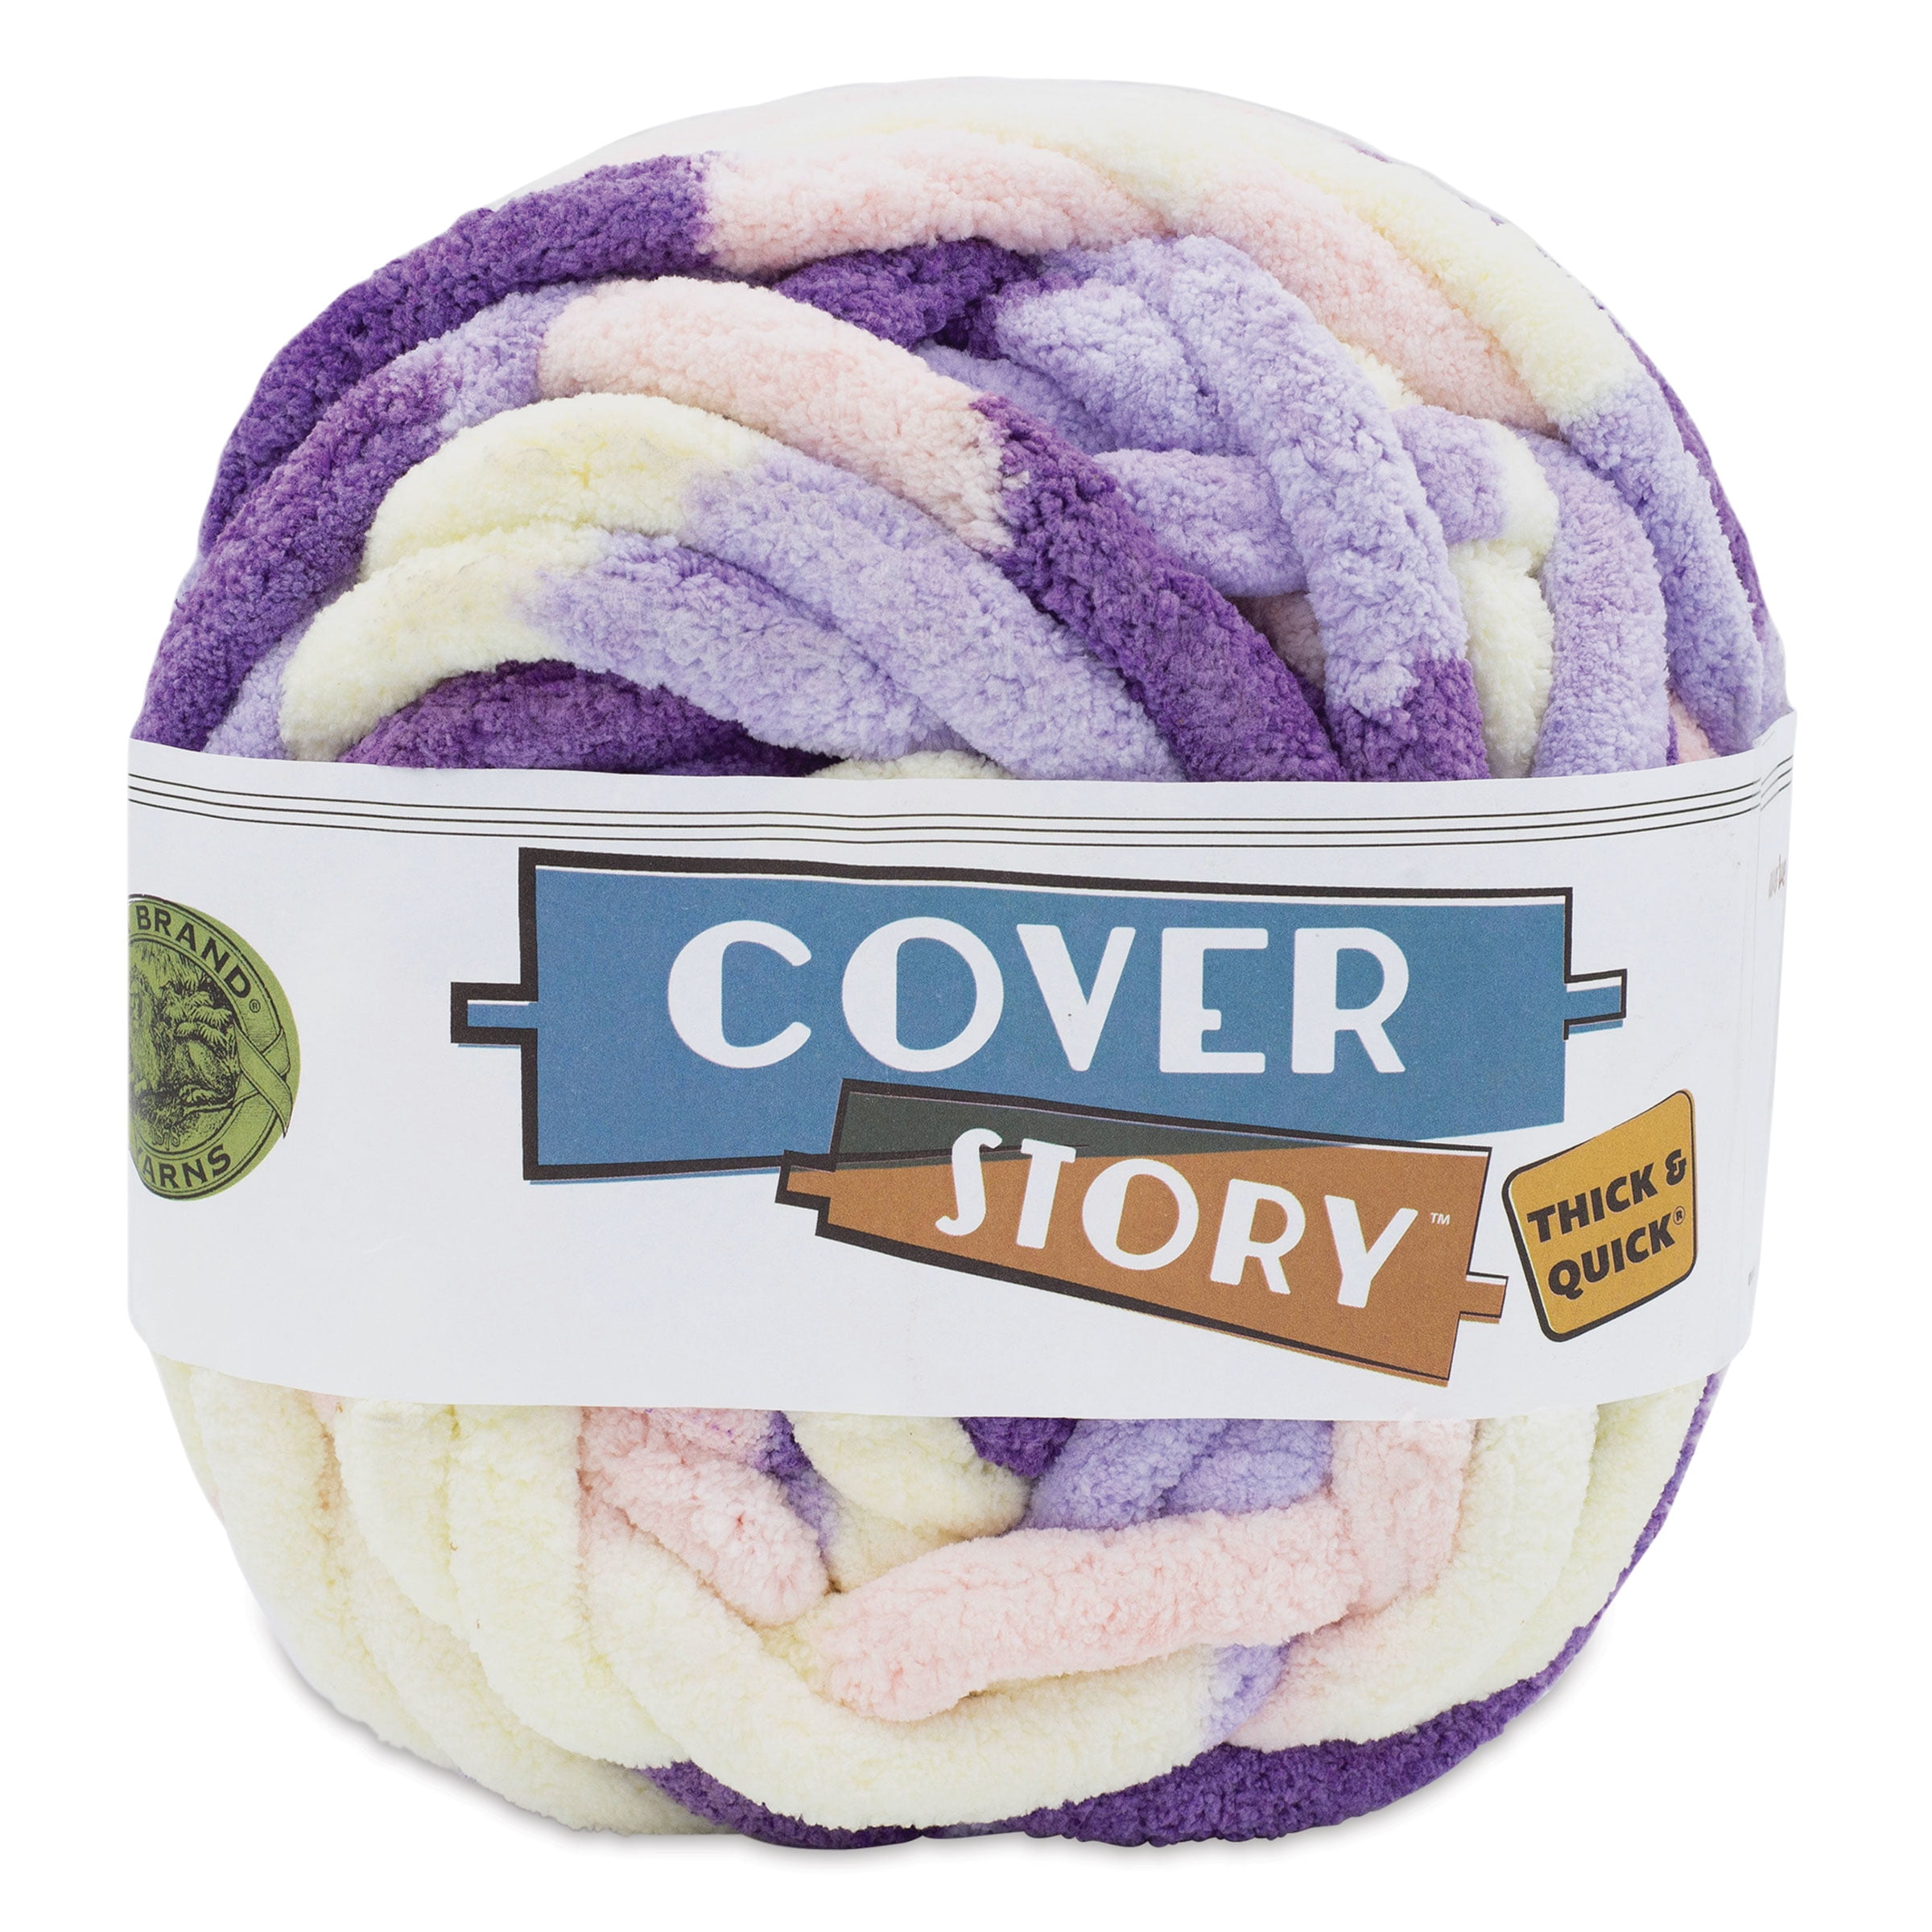 Lion Brand Cover Story Thick & Quick Yarn - Lavender Fields, 39 Yards